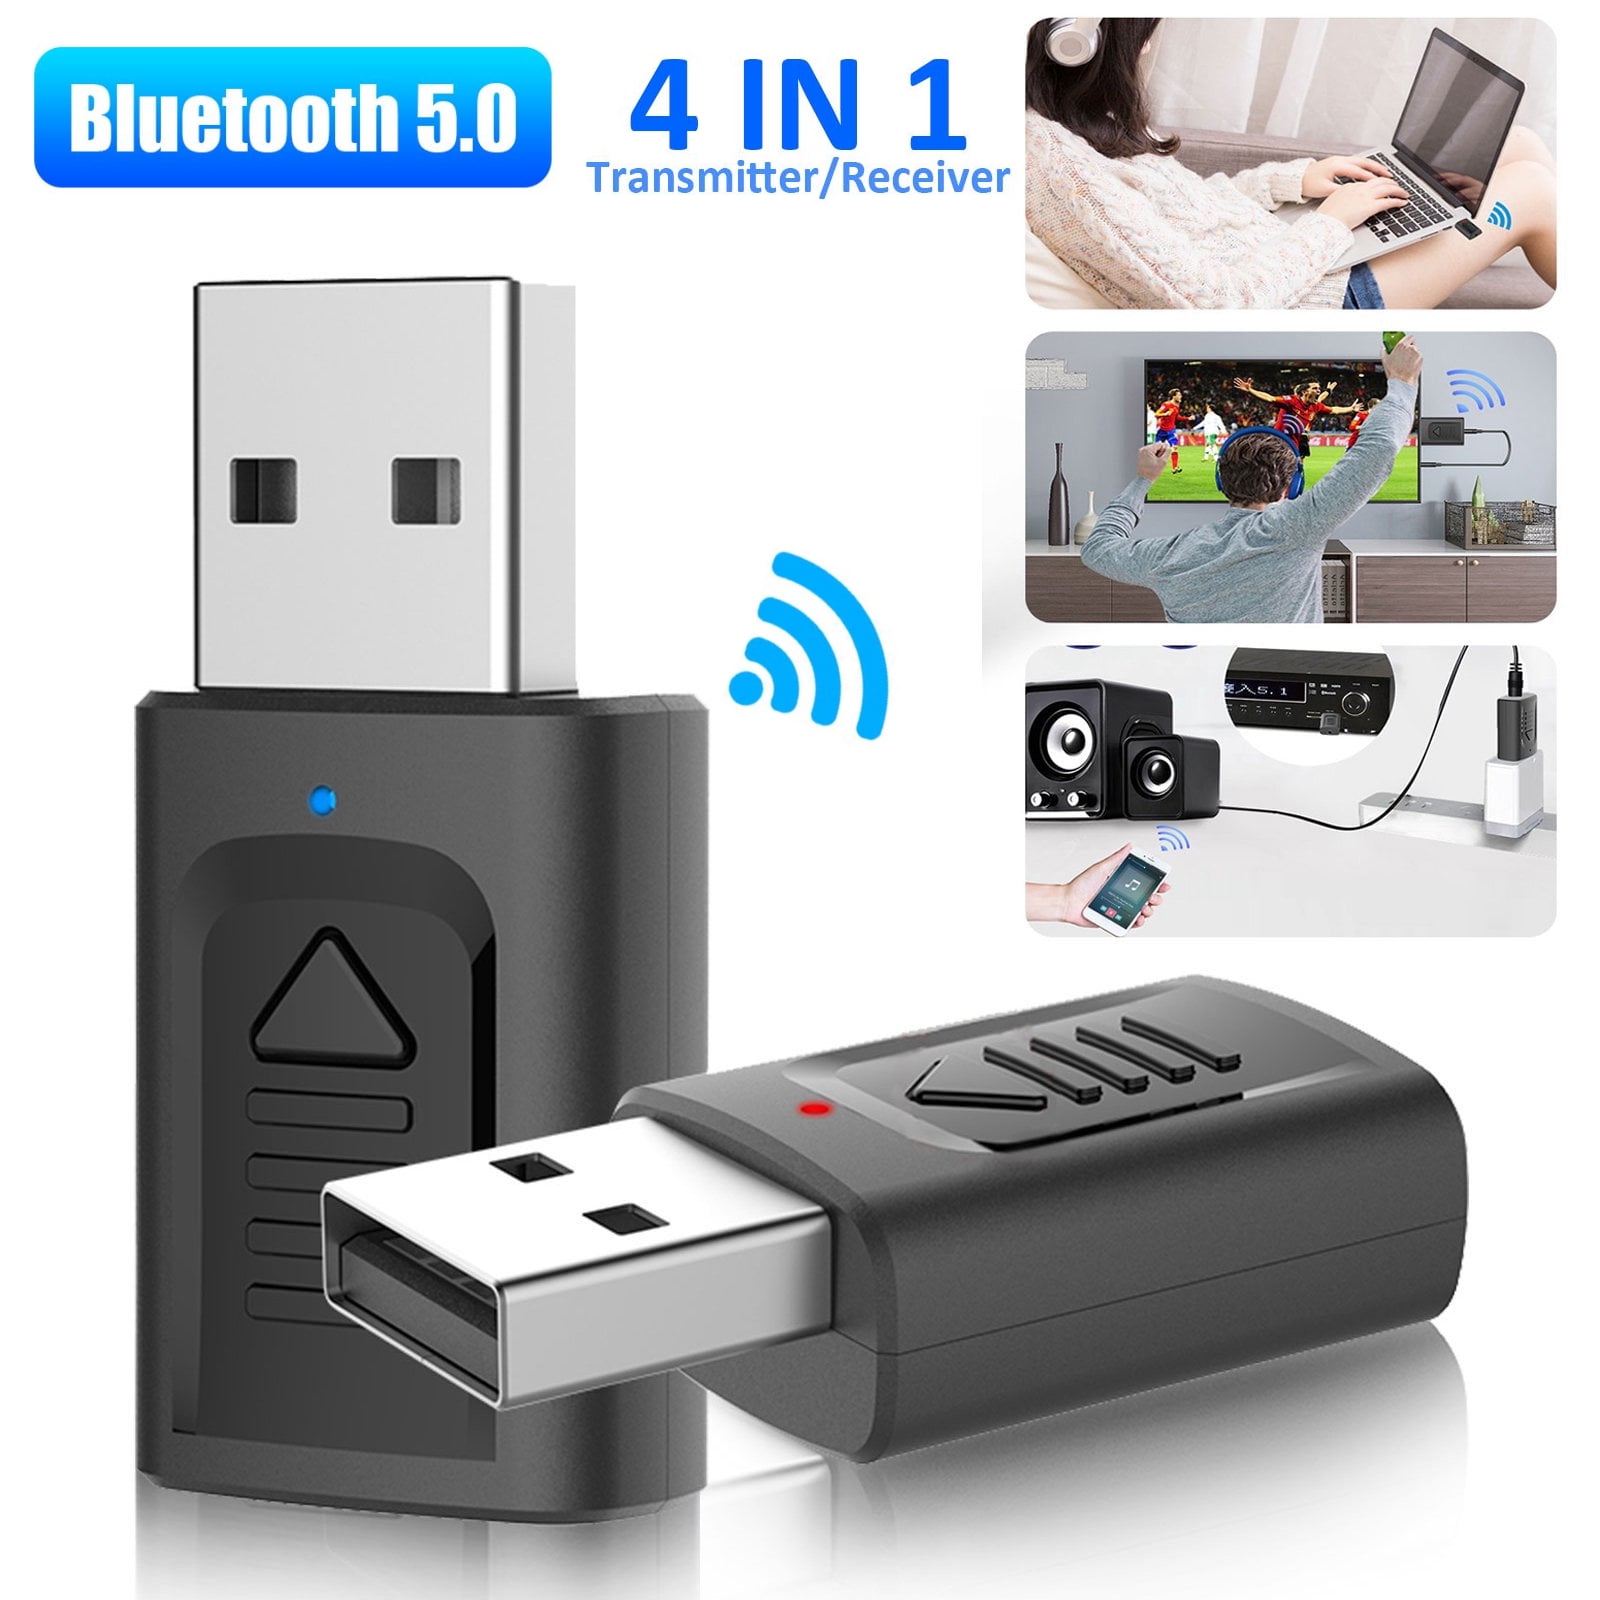 Bluetooth 5.0 Transmitter Receiver 3.5mm Wireless Audio Adapter for TV/Home Stereo System,Pair with 2 Bluetooth Headphones 